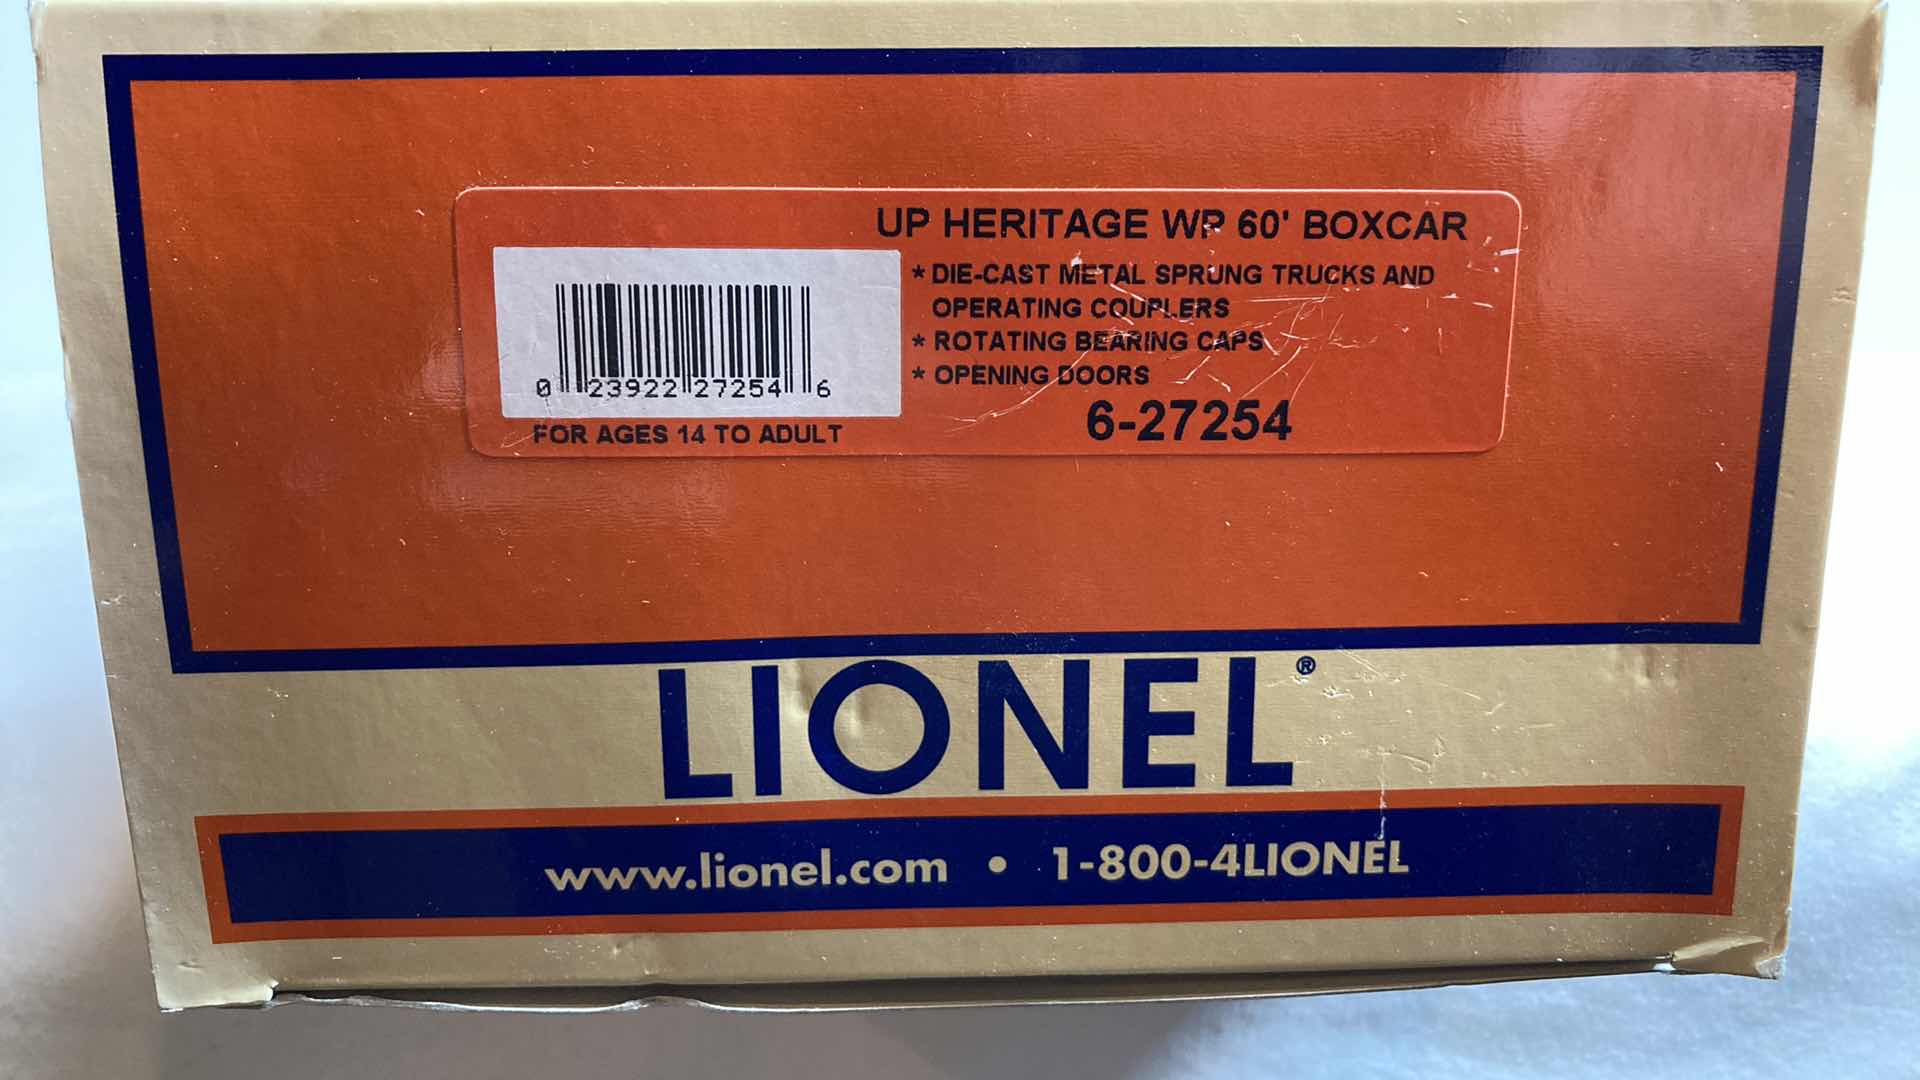 Photo 3 of LIONEL UP HERITAGE WP 60' BOXCAR
6-27254